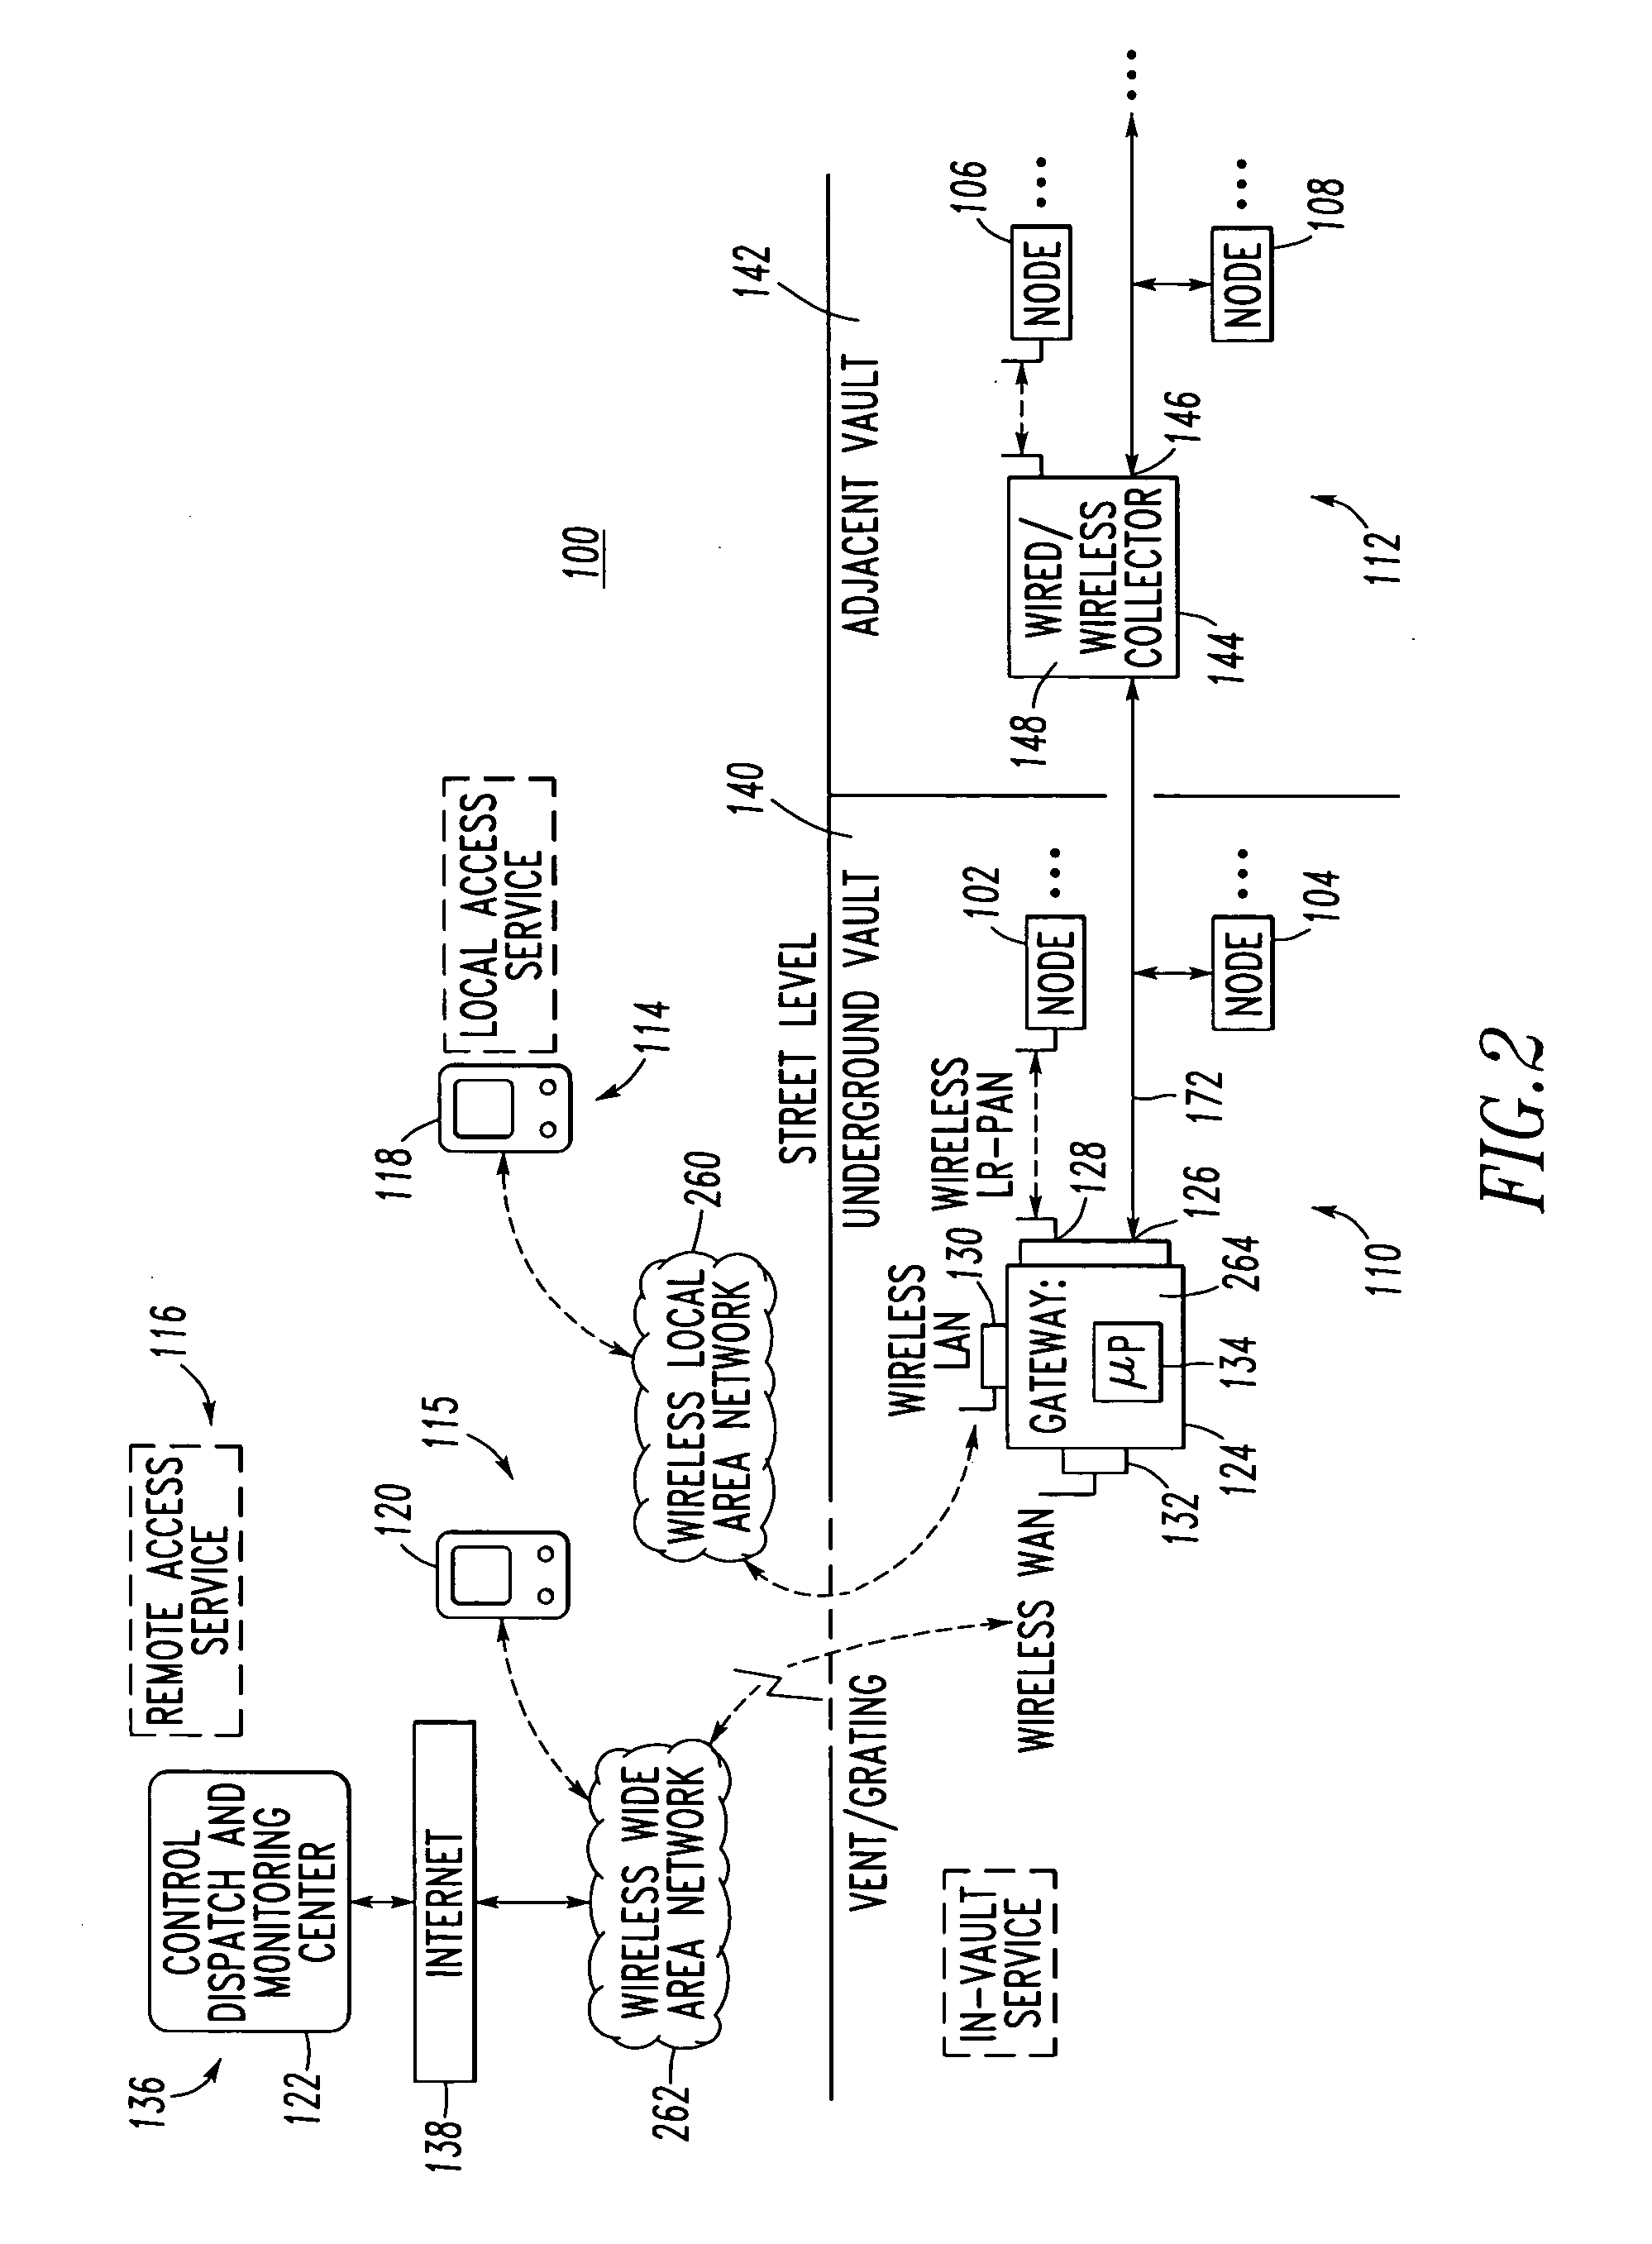 Power distribution communication system employing gateway including wired and wireless communication interfaces